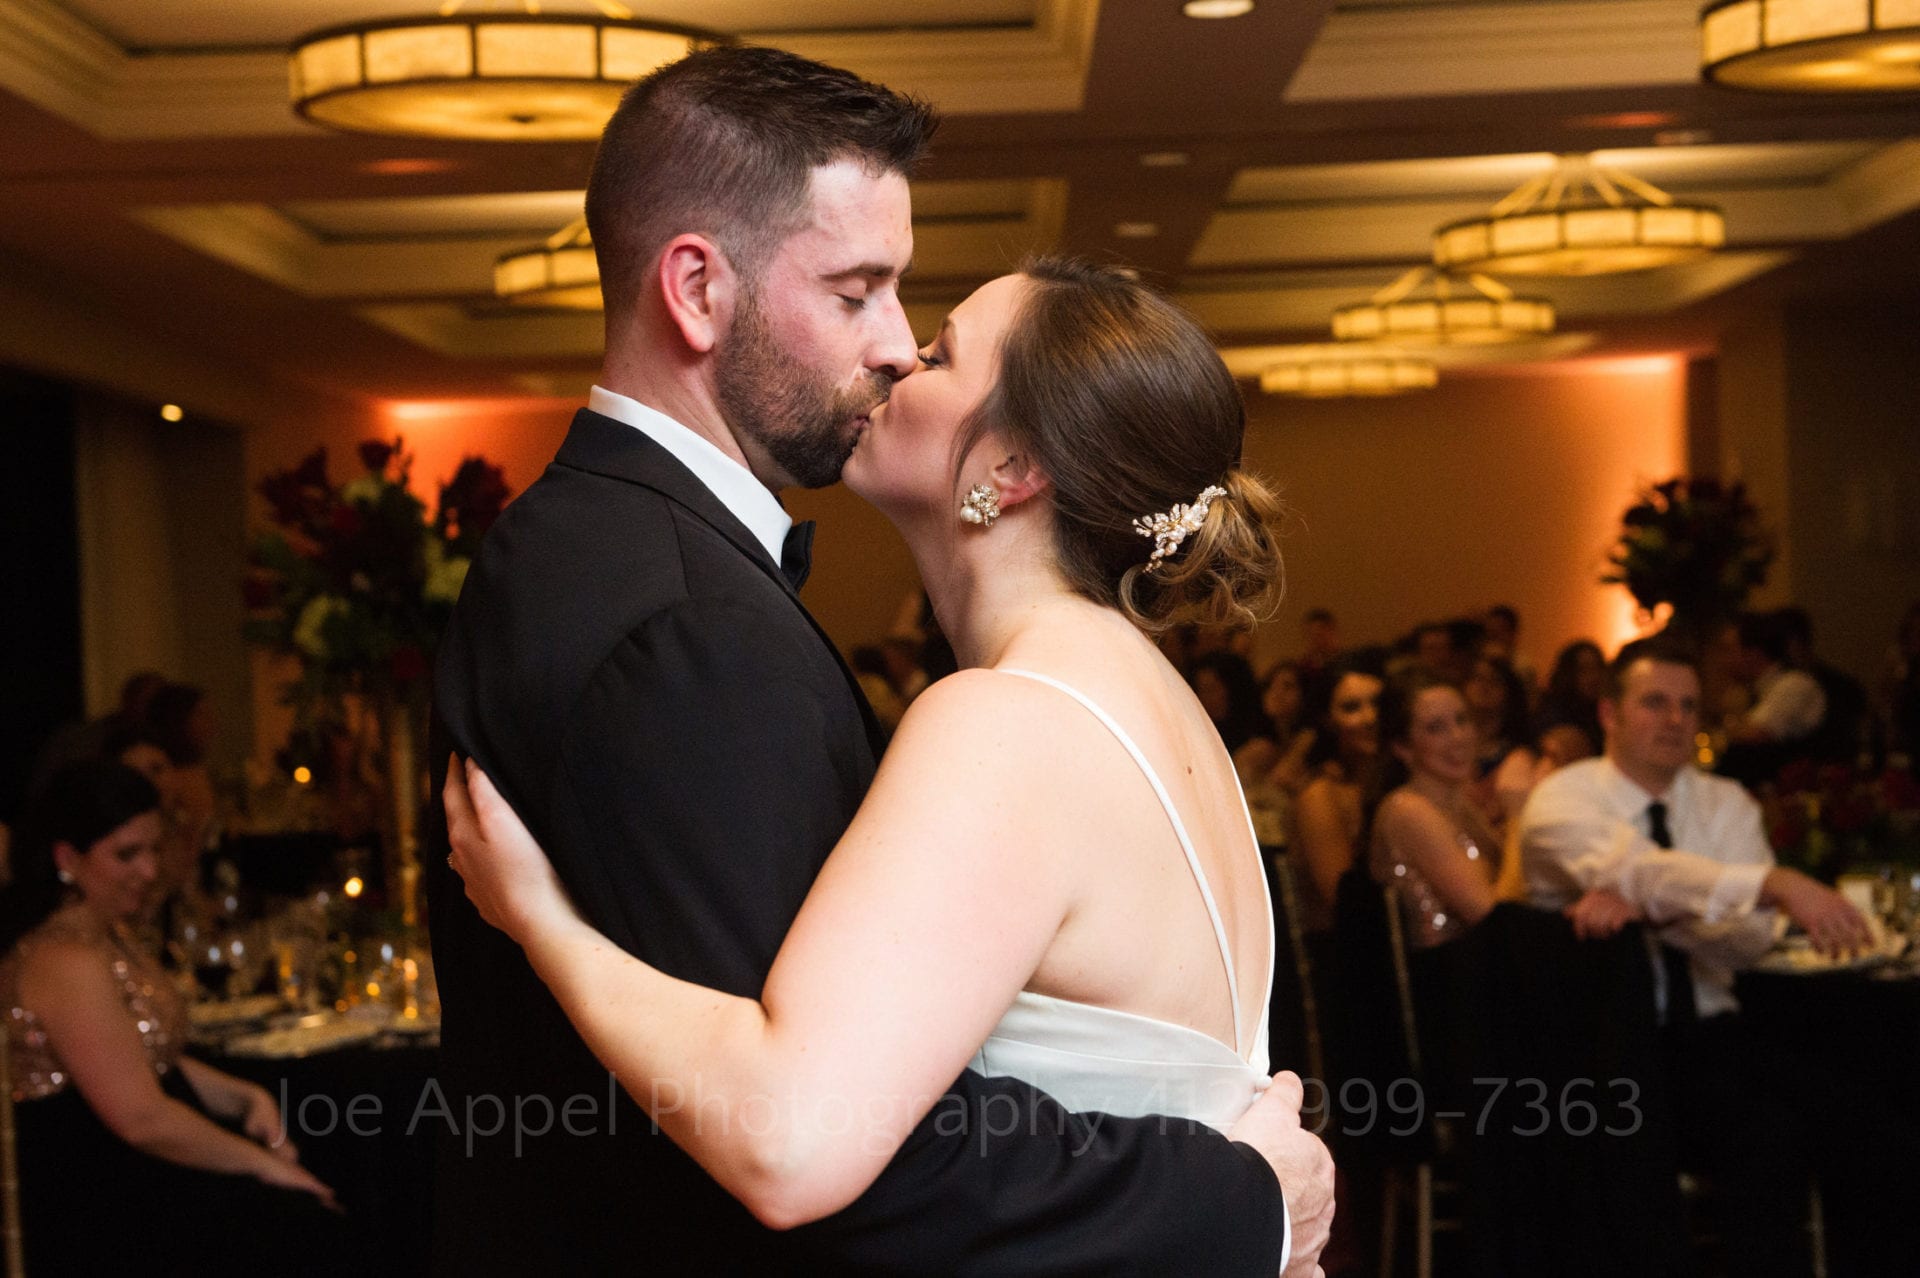 A bride and groom share a kiss on the dance floor at the Renaissance Pittsburgh Hotel during their wedding reception.